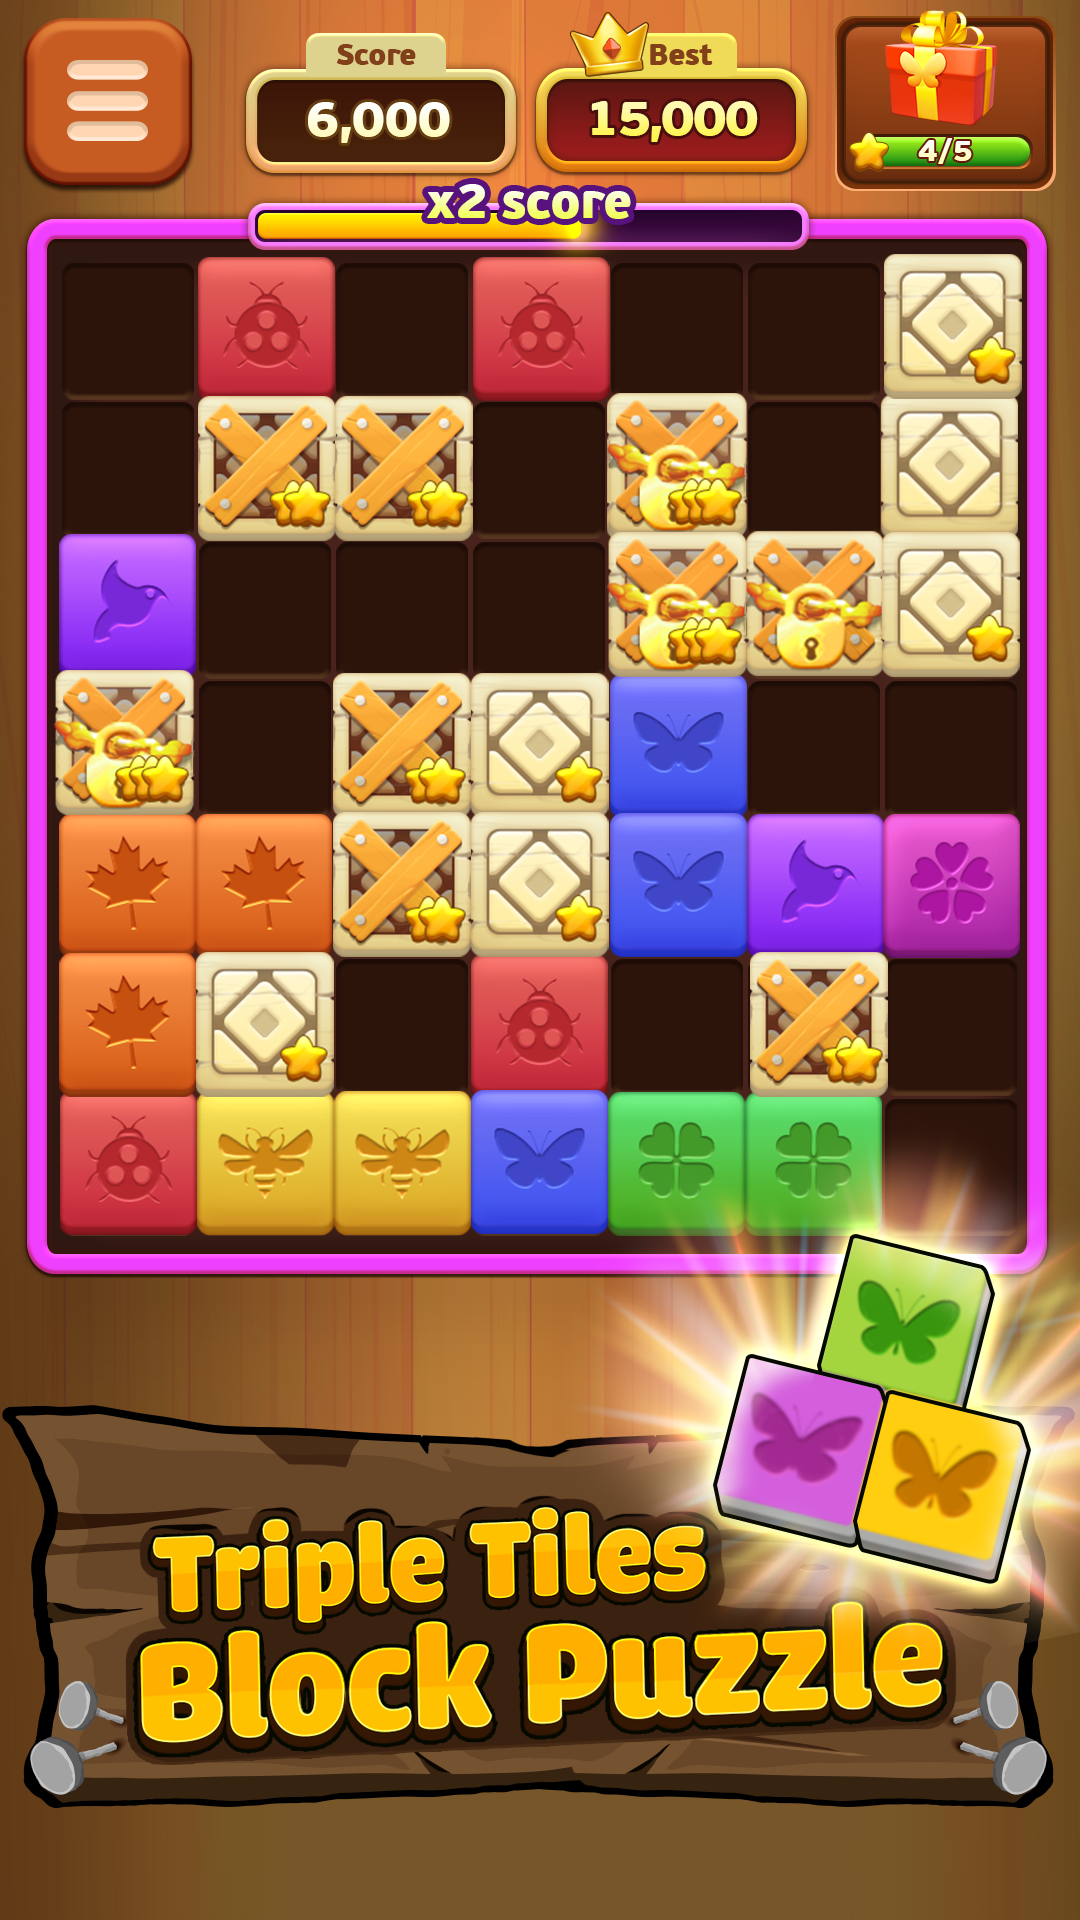 Screenshot 1 of Triple Butterfly: Blockpuzzle 63.1.0